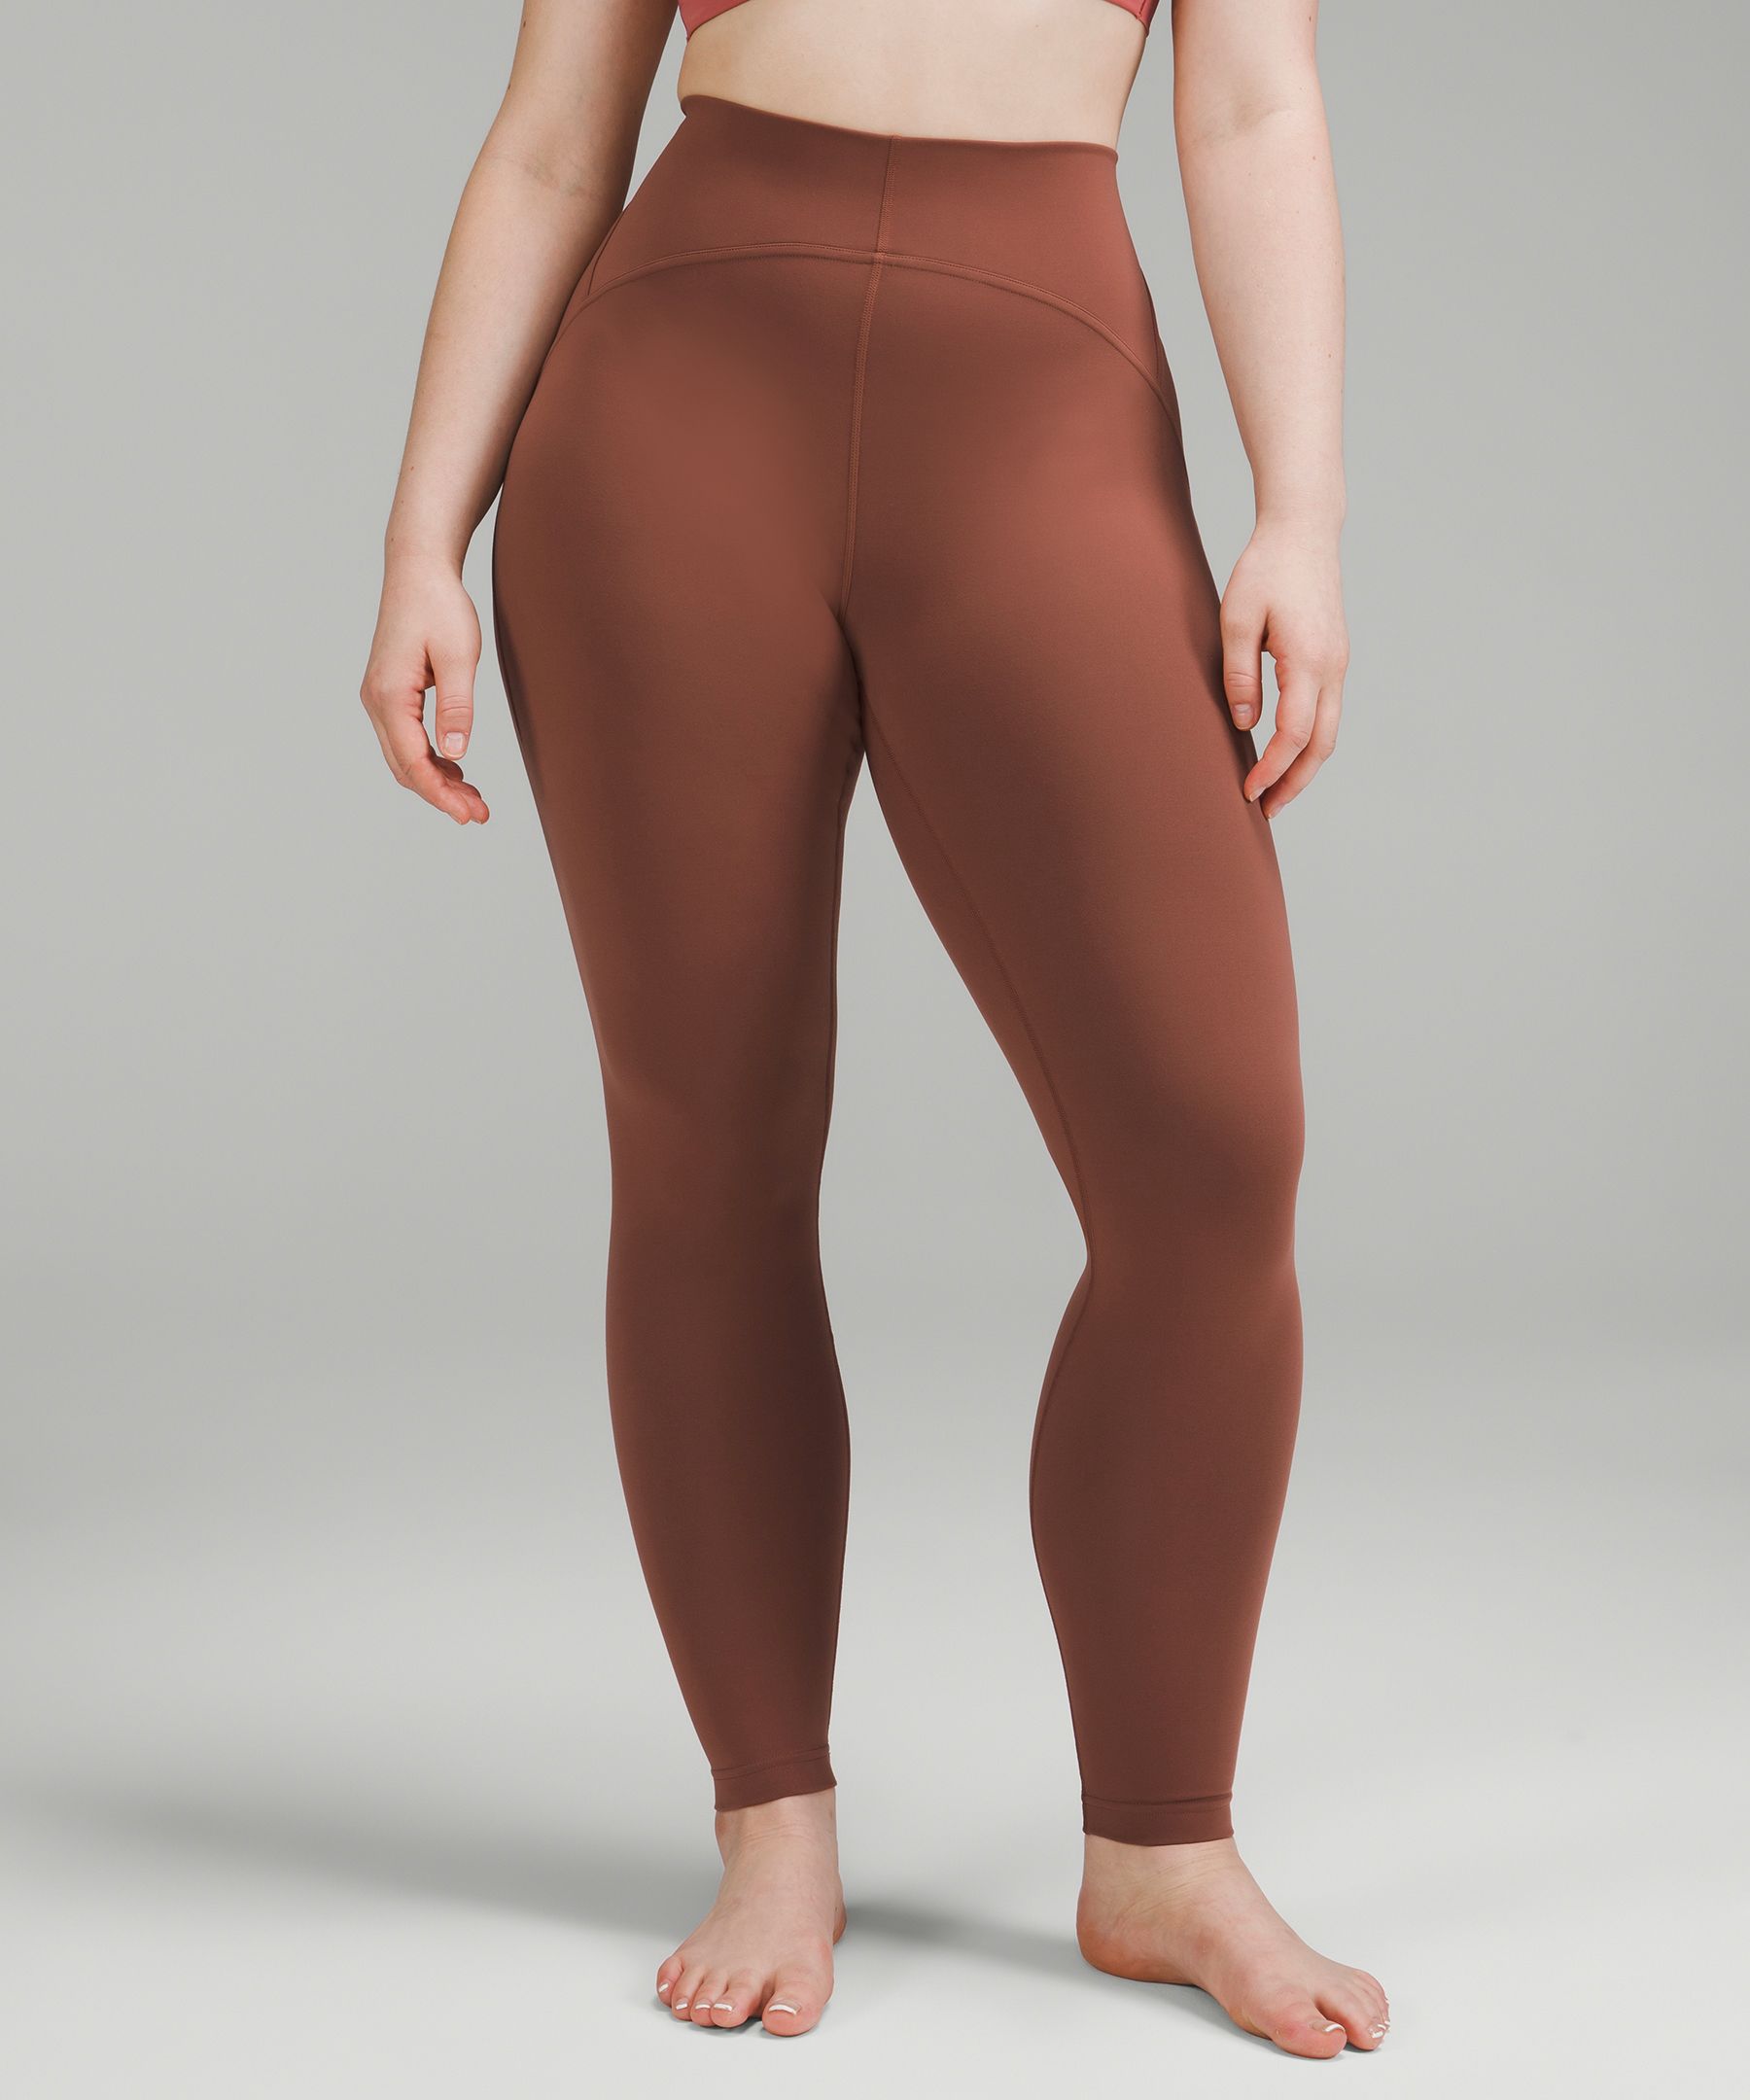 Lululemon unlimit high rise tights 25” BROWN EARTH Sz 6